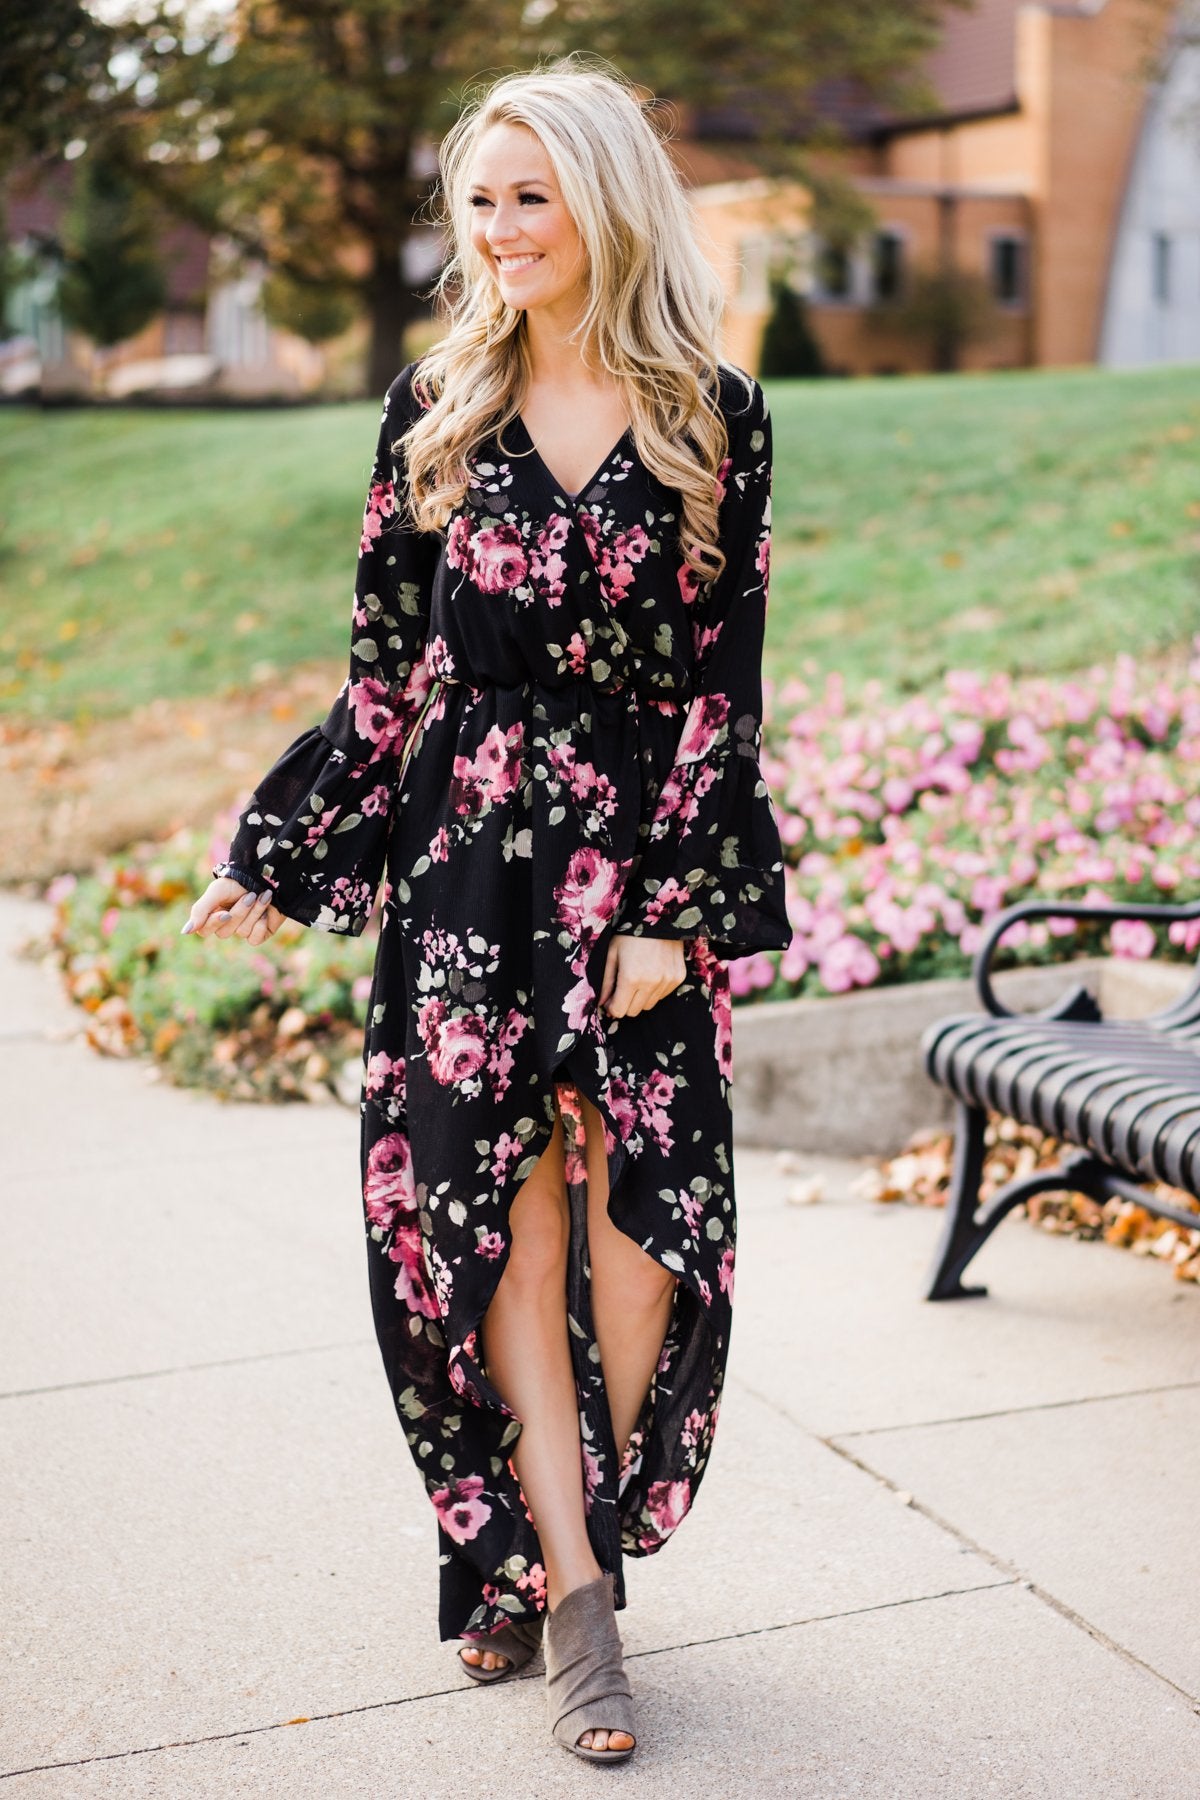 shoes to wear with black floral dress